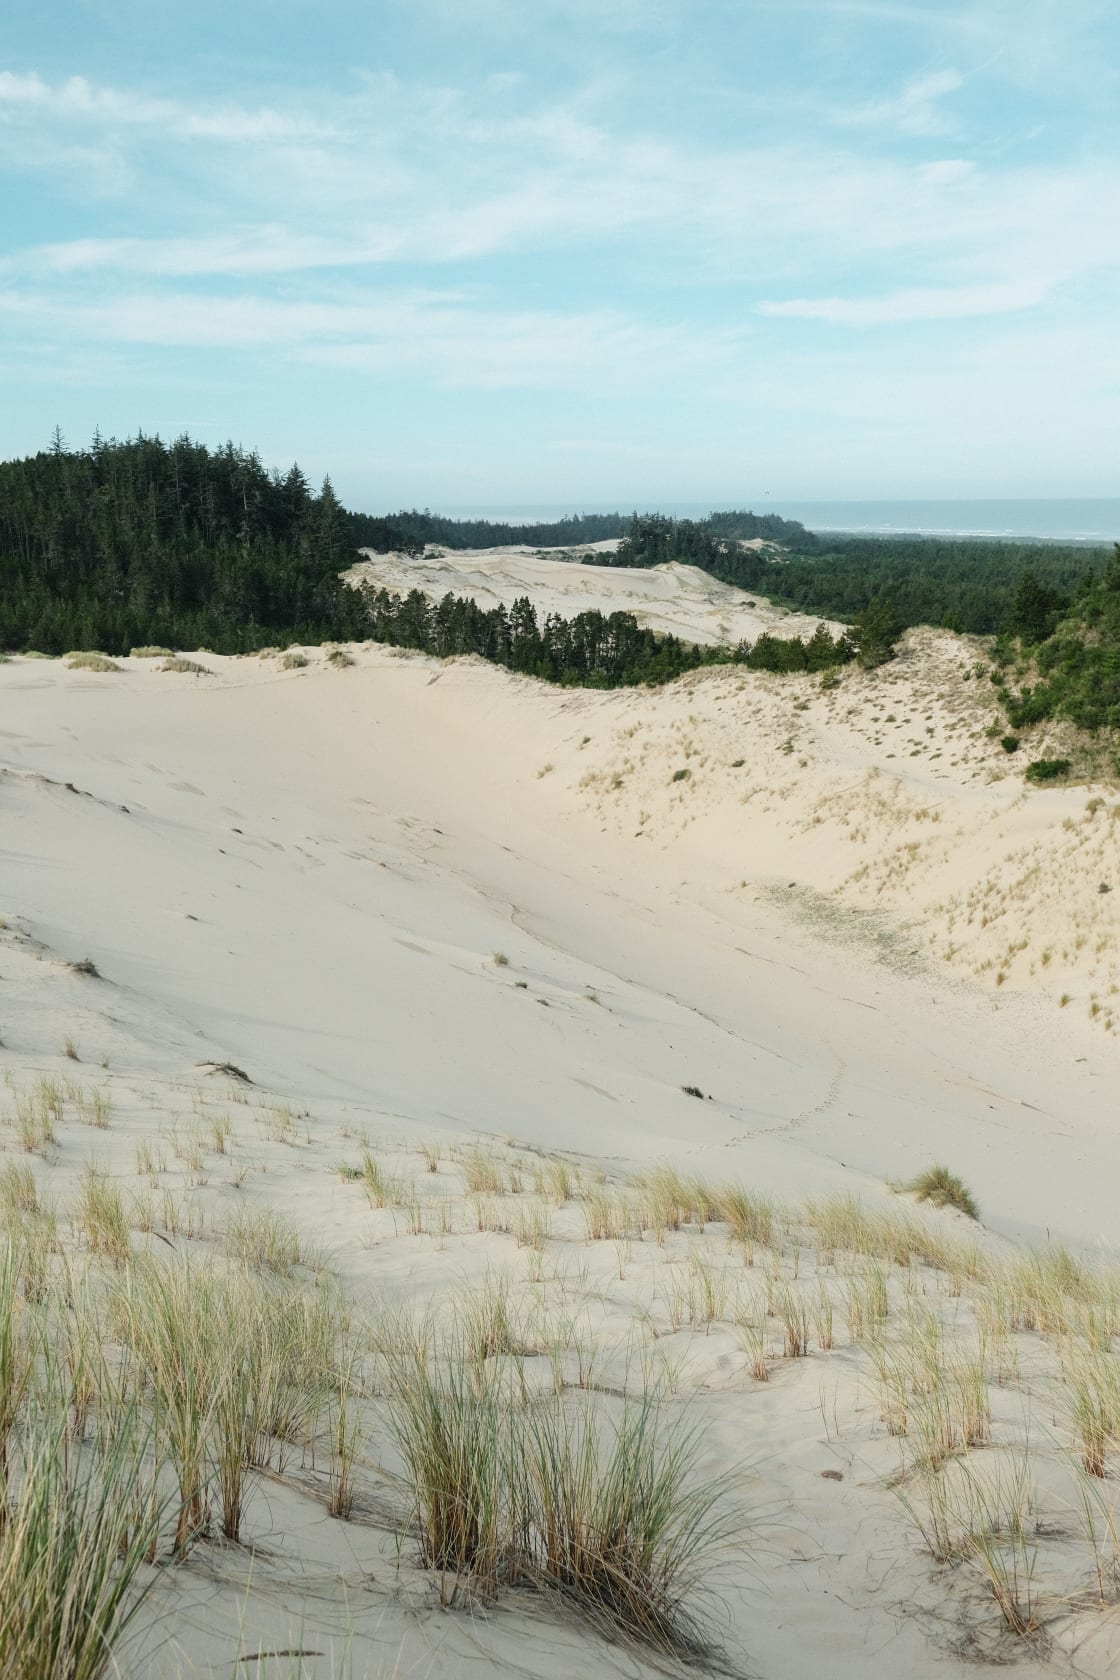 The lodge is only 30 minutes from the Oregon Dunes.